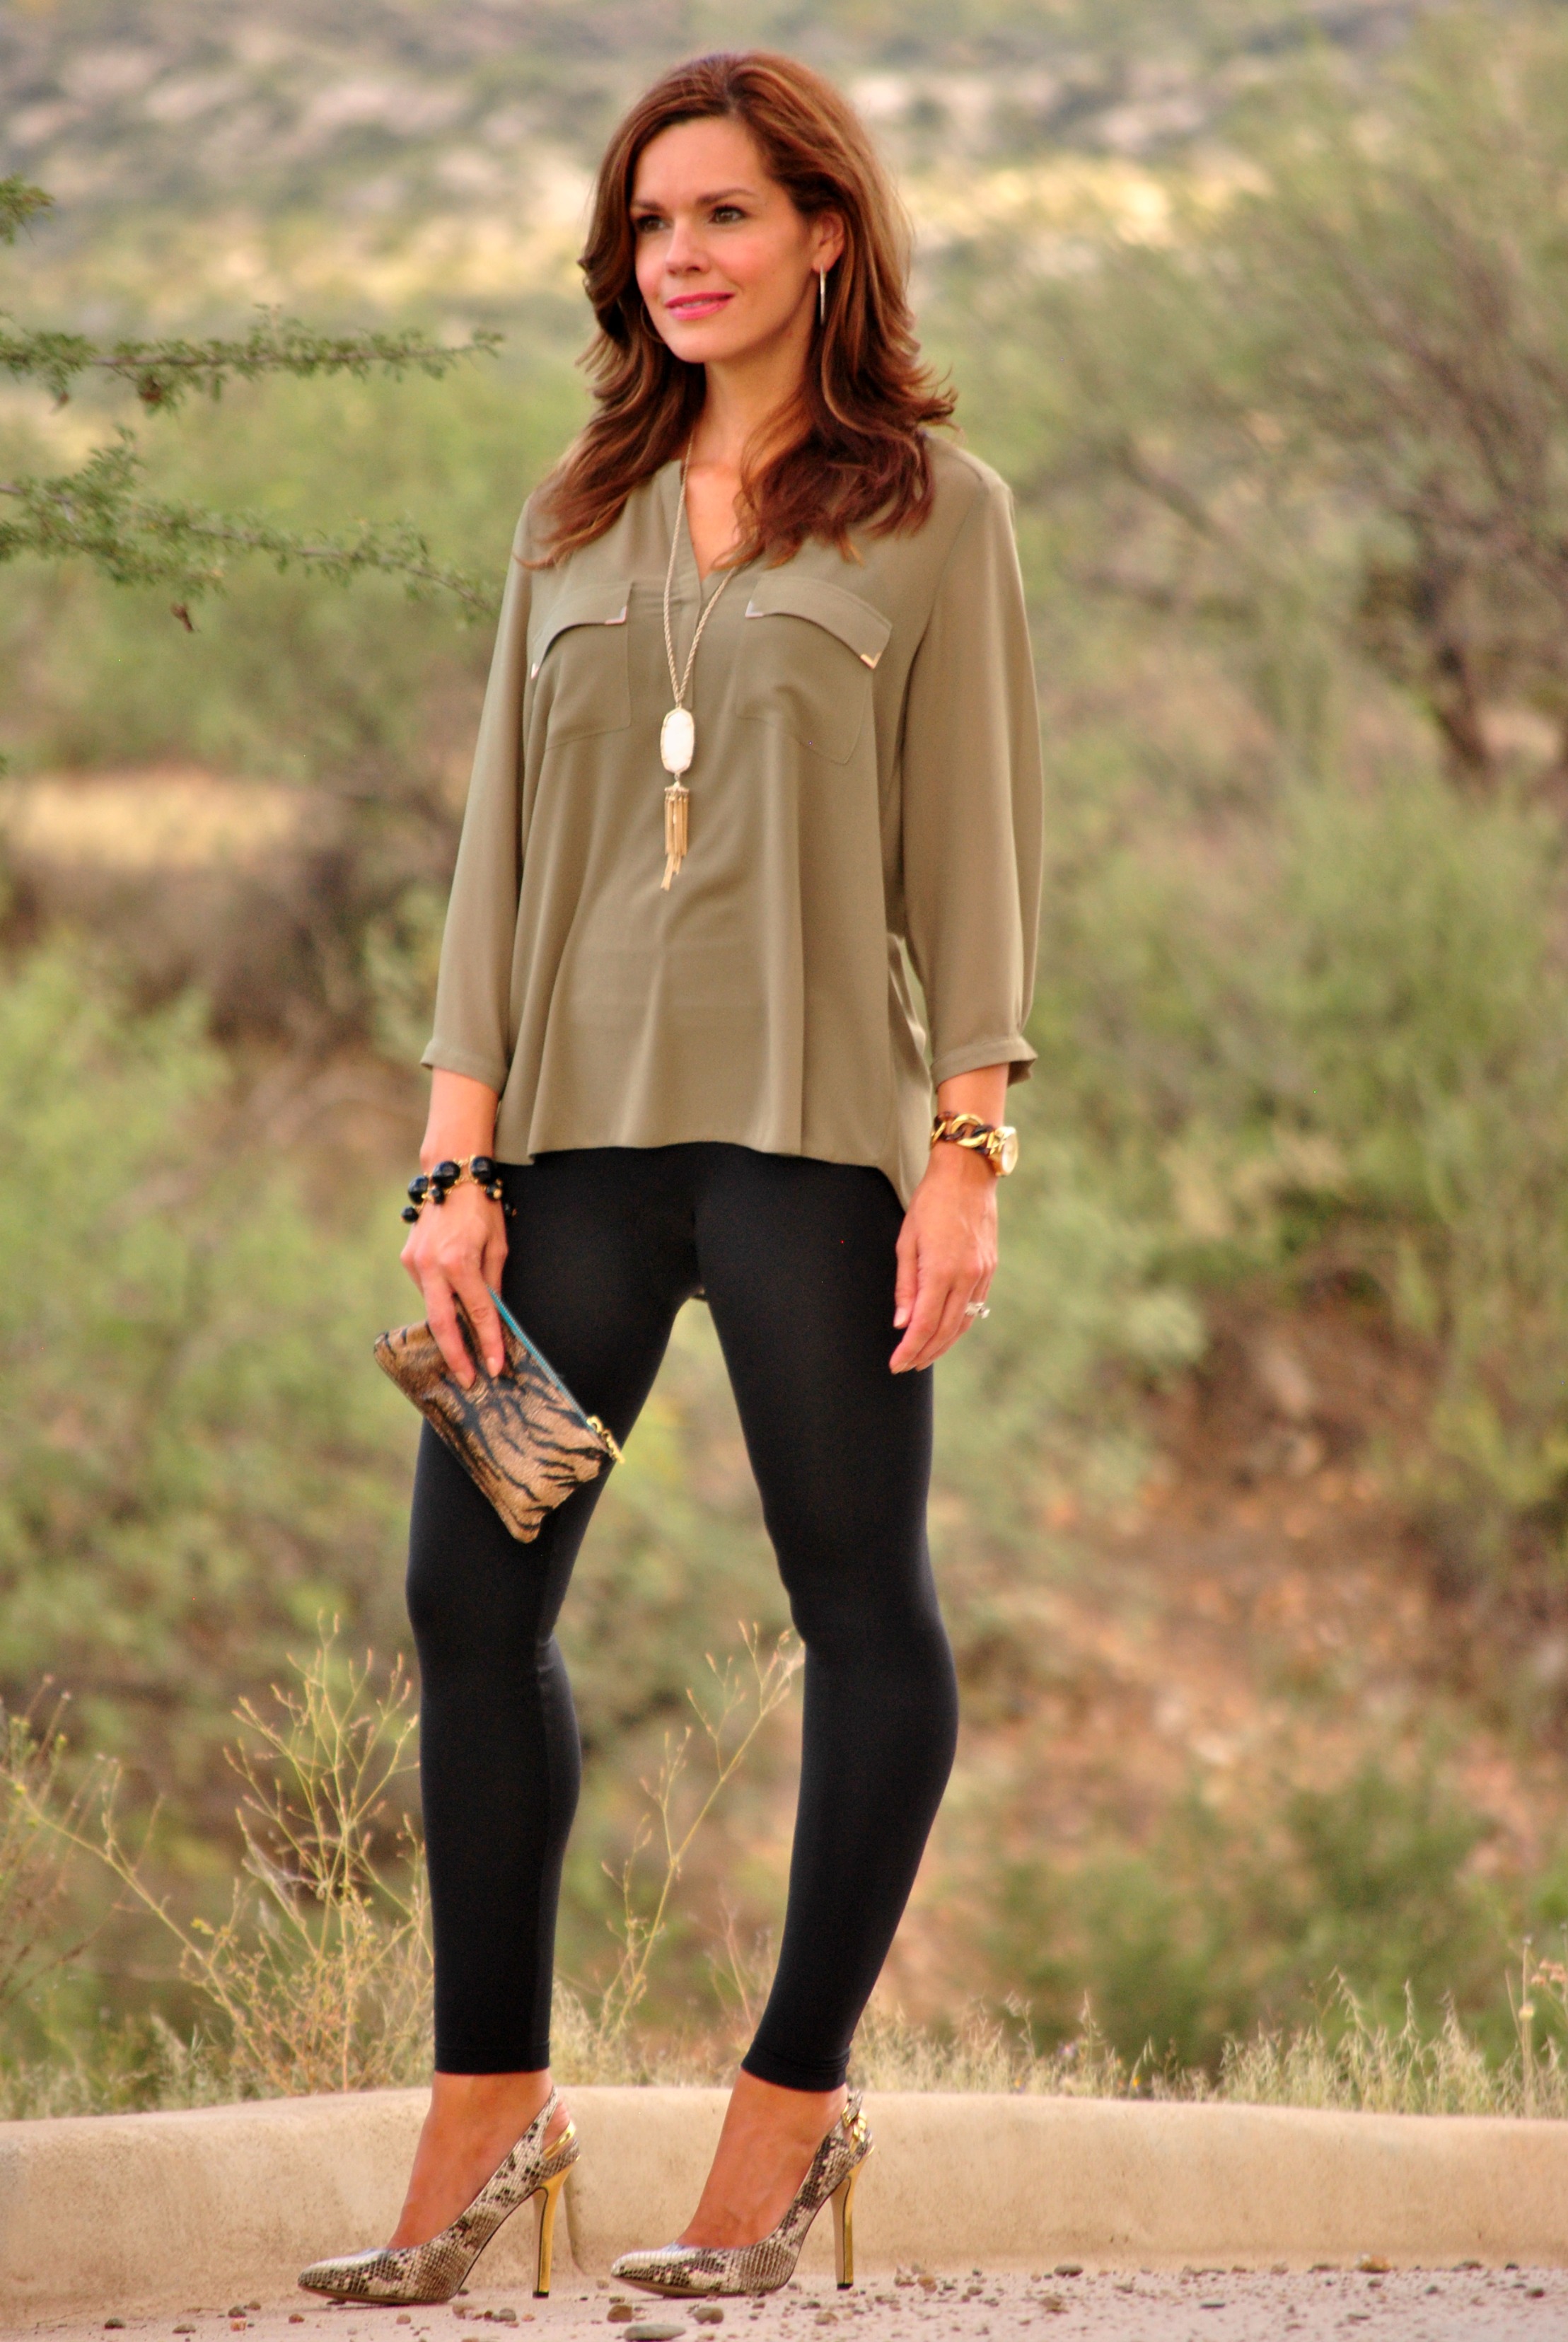 Five Fall Spanx Faux Leather Leggings Outfits - By Lauren M